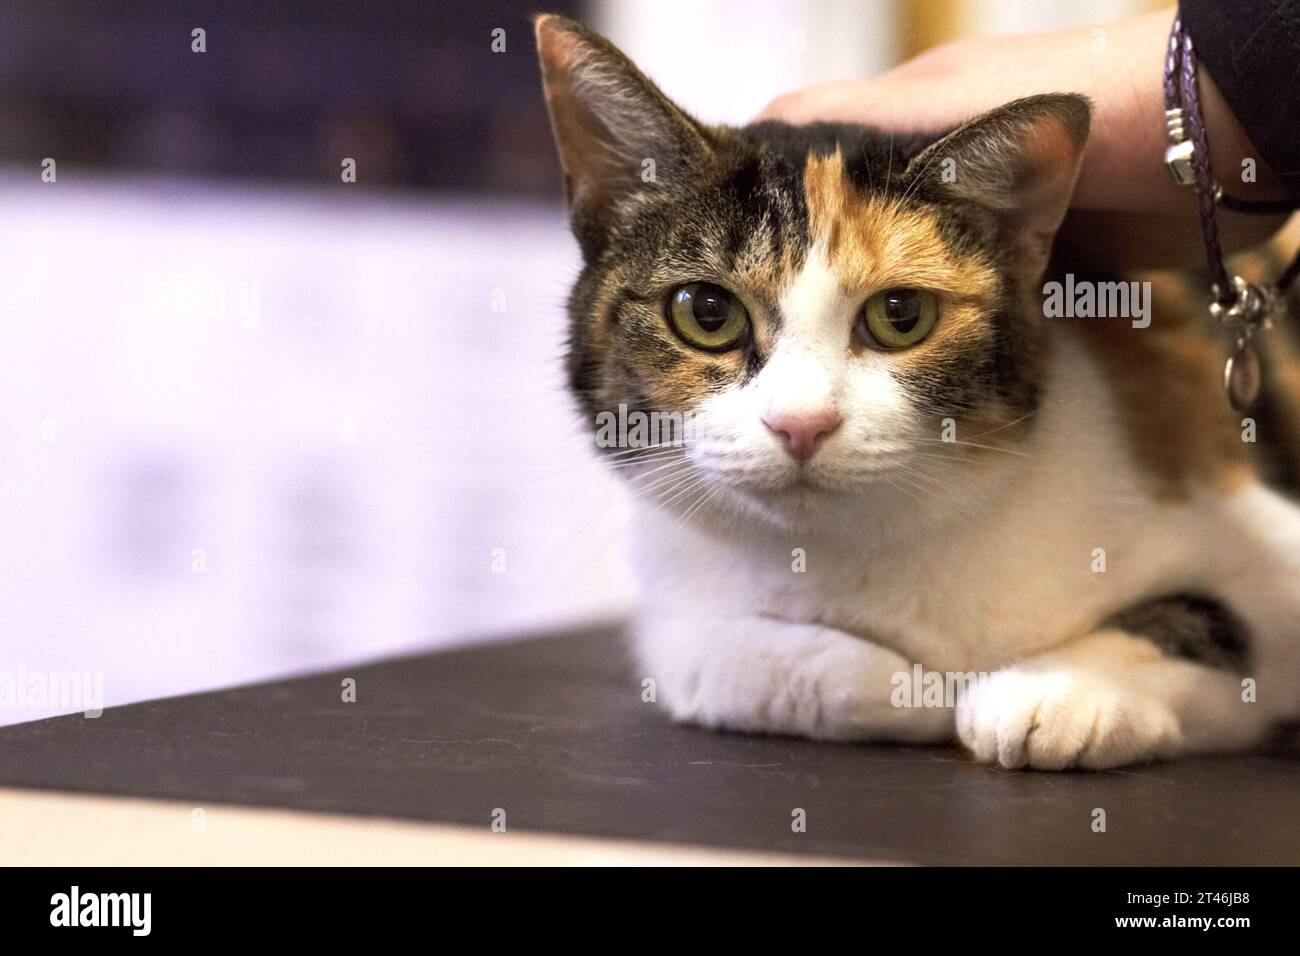 Veterinary, portrait and cat on table for consultation, examination or health checkup at hospital or clinic. Animal, face and pet at vet for Stock Photo